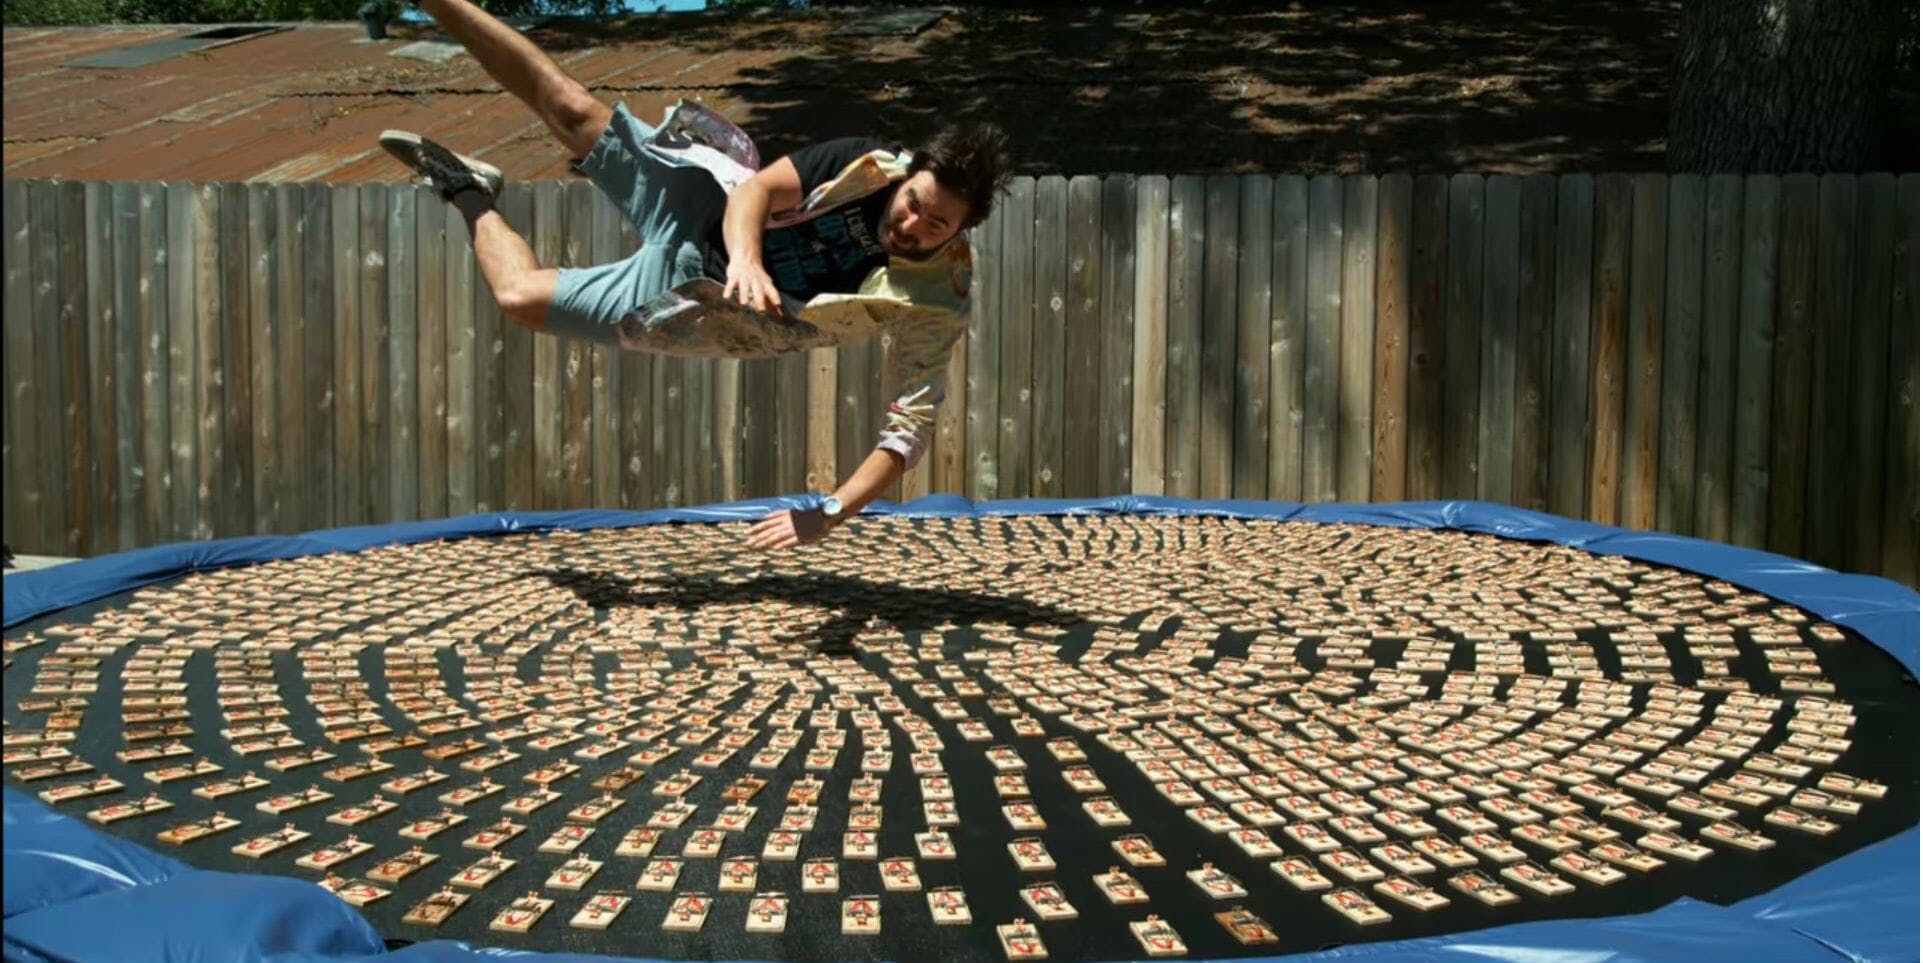 Watch Horror Dude Jumps On a Trampoline With 1,000 Mouse Traps